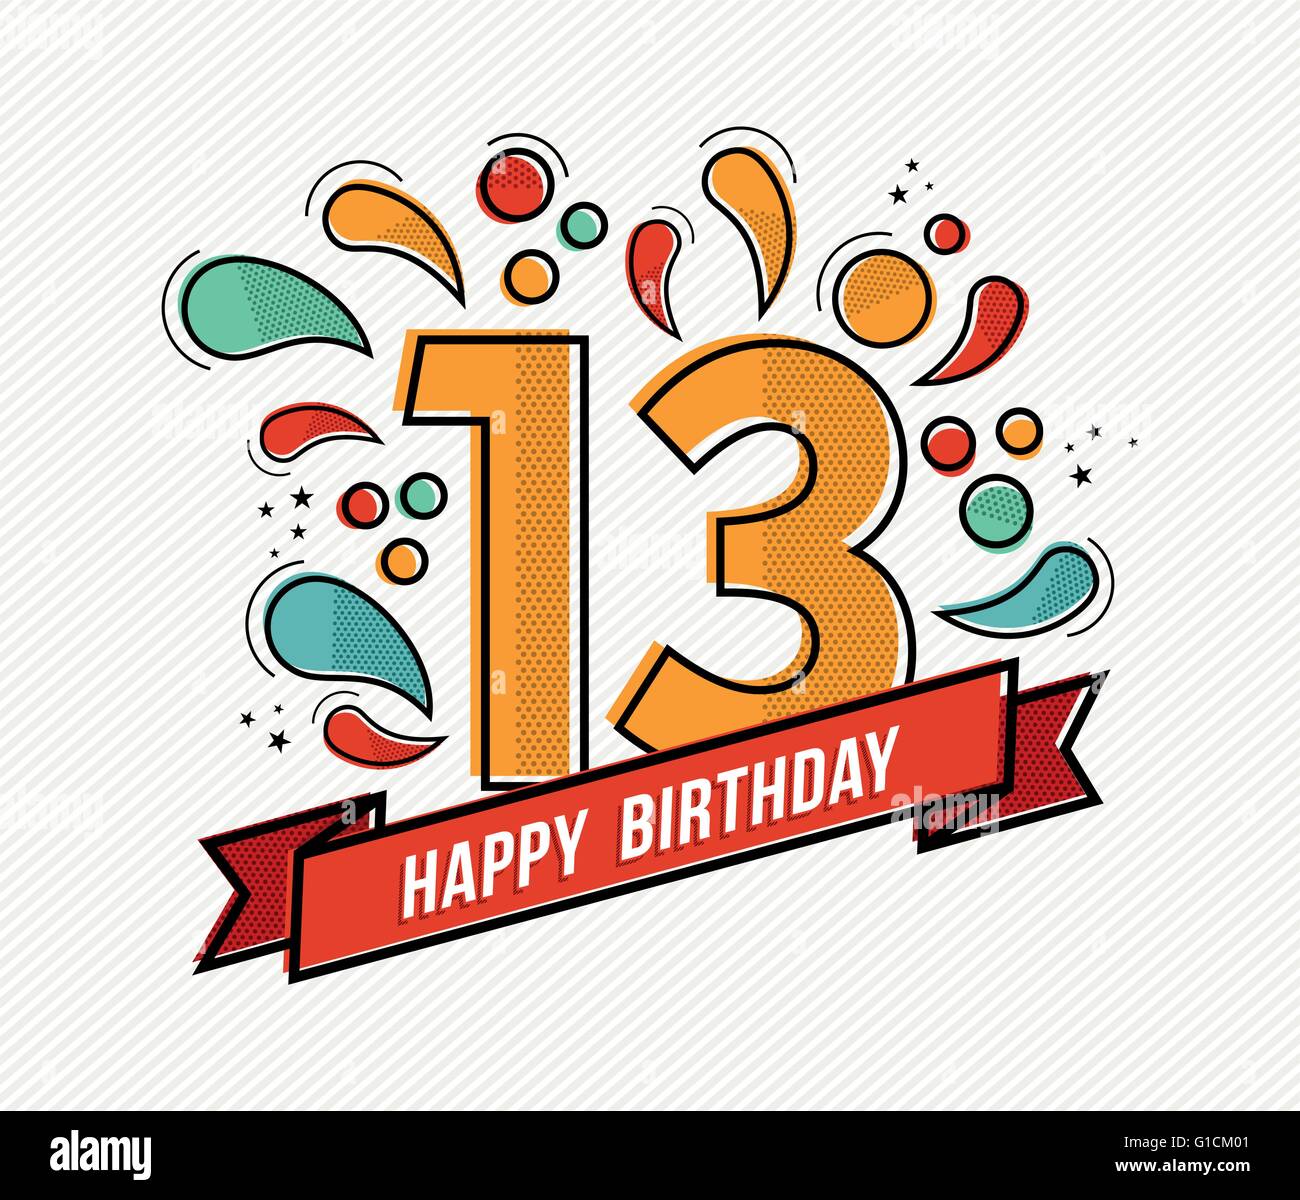 Happy birthday number 13, greeting card for thirteen year in modern flat line art with colorful geometric shapes. Stock Vector